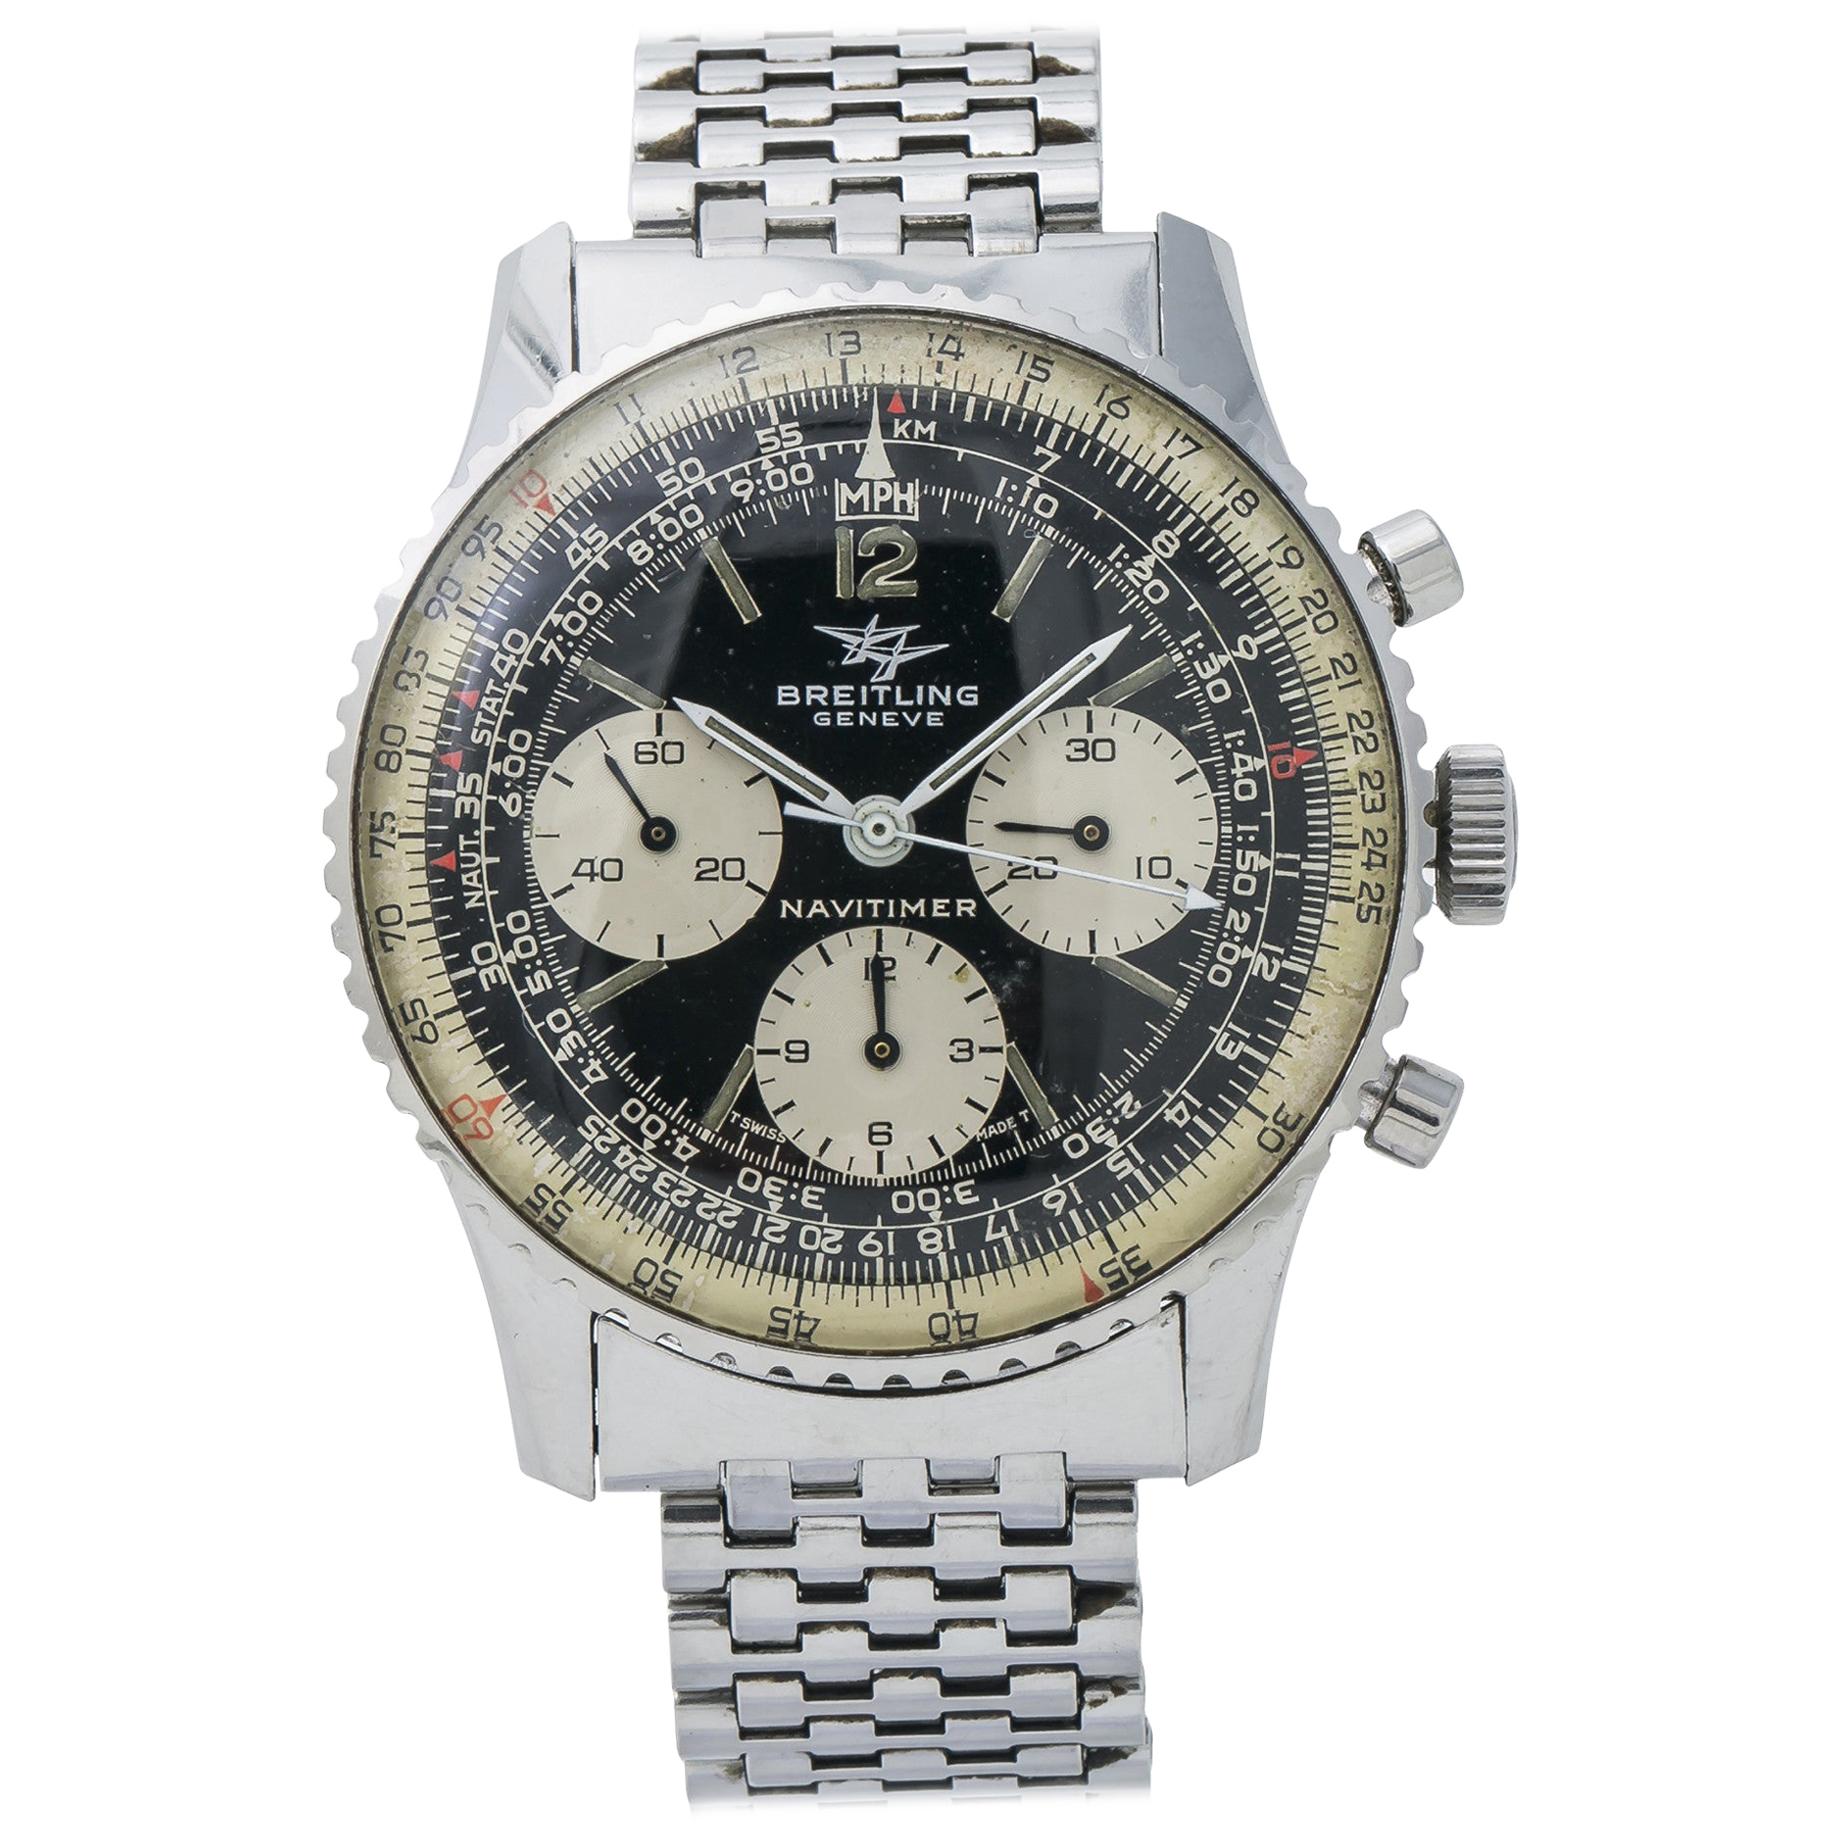 Breitling Navitimer 806, Black Dial, Certified and Warranty For Sale